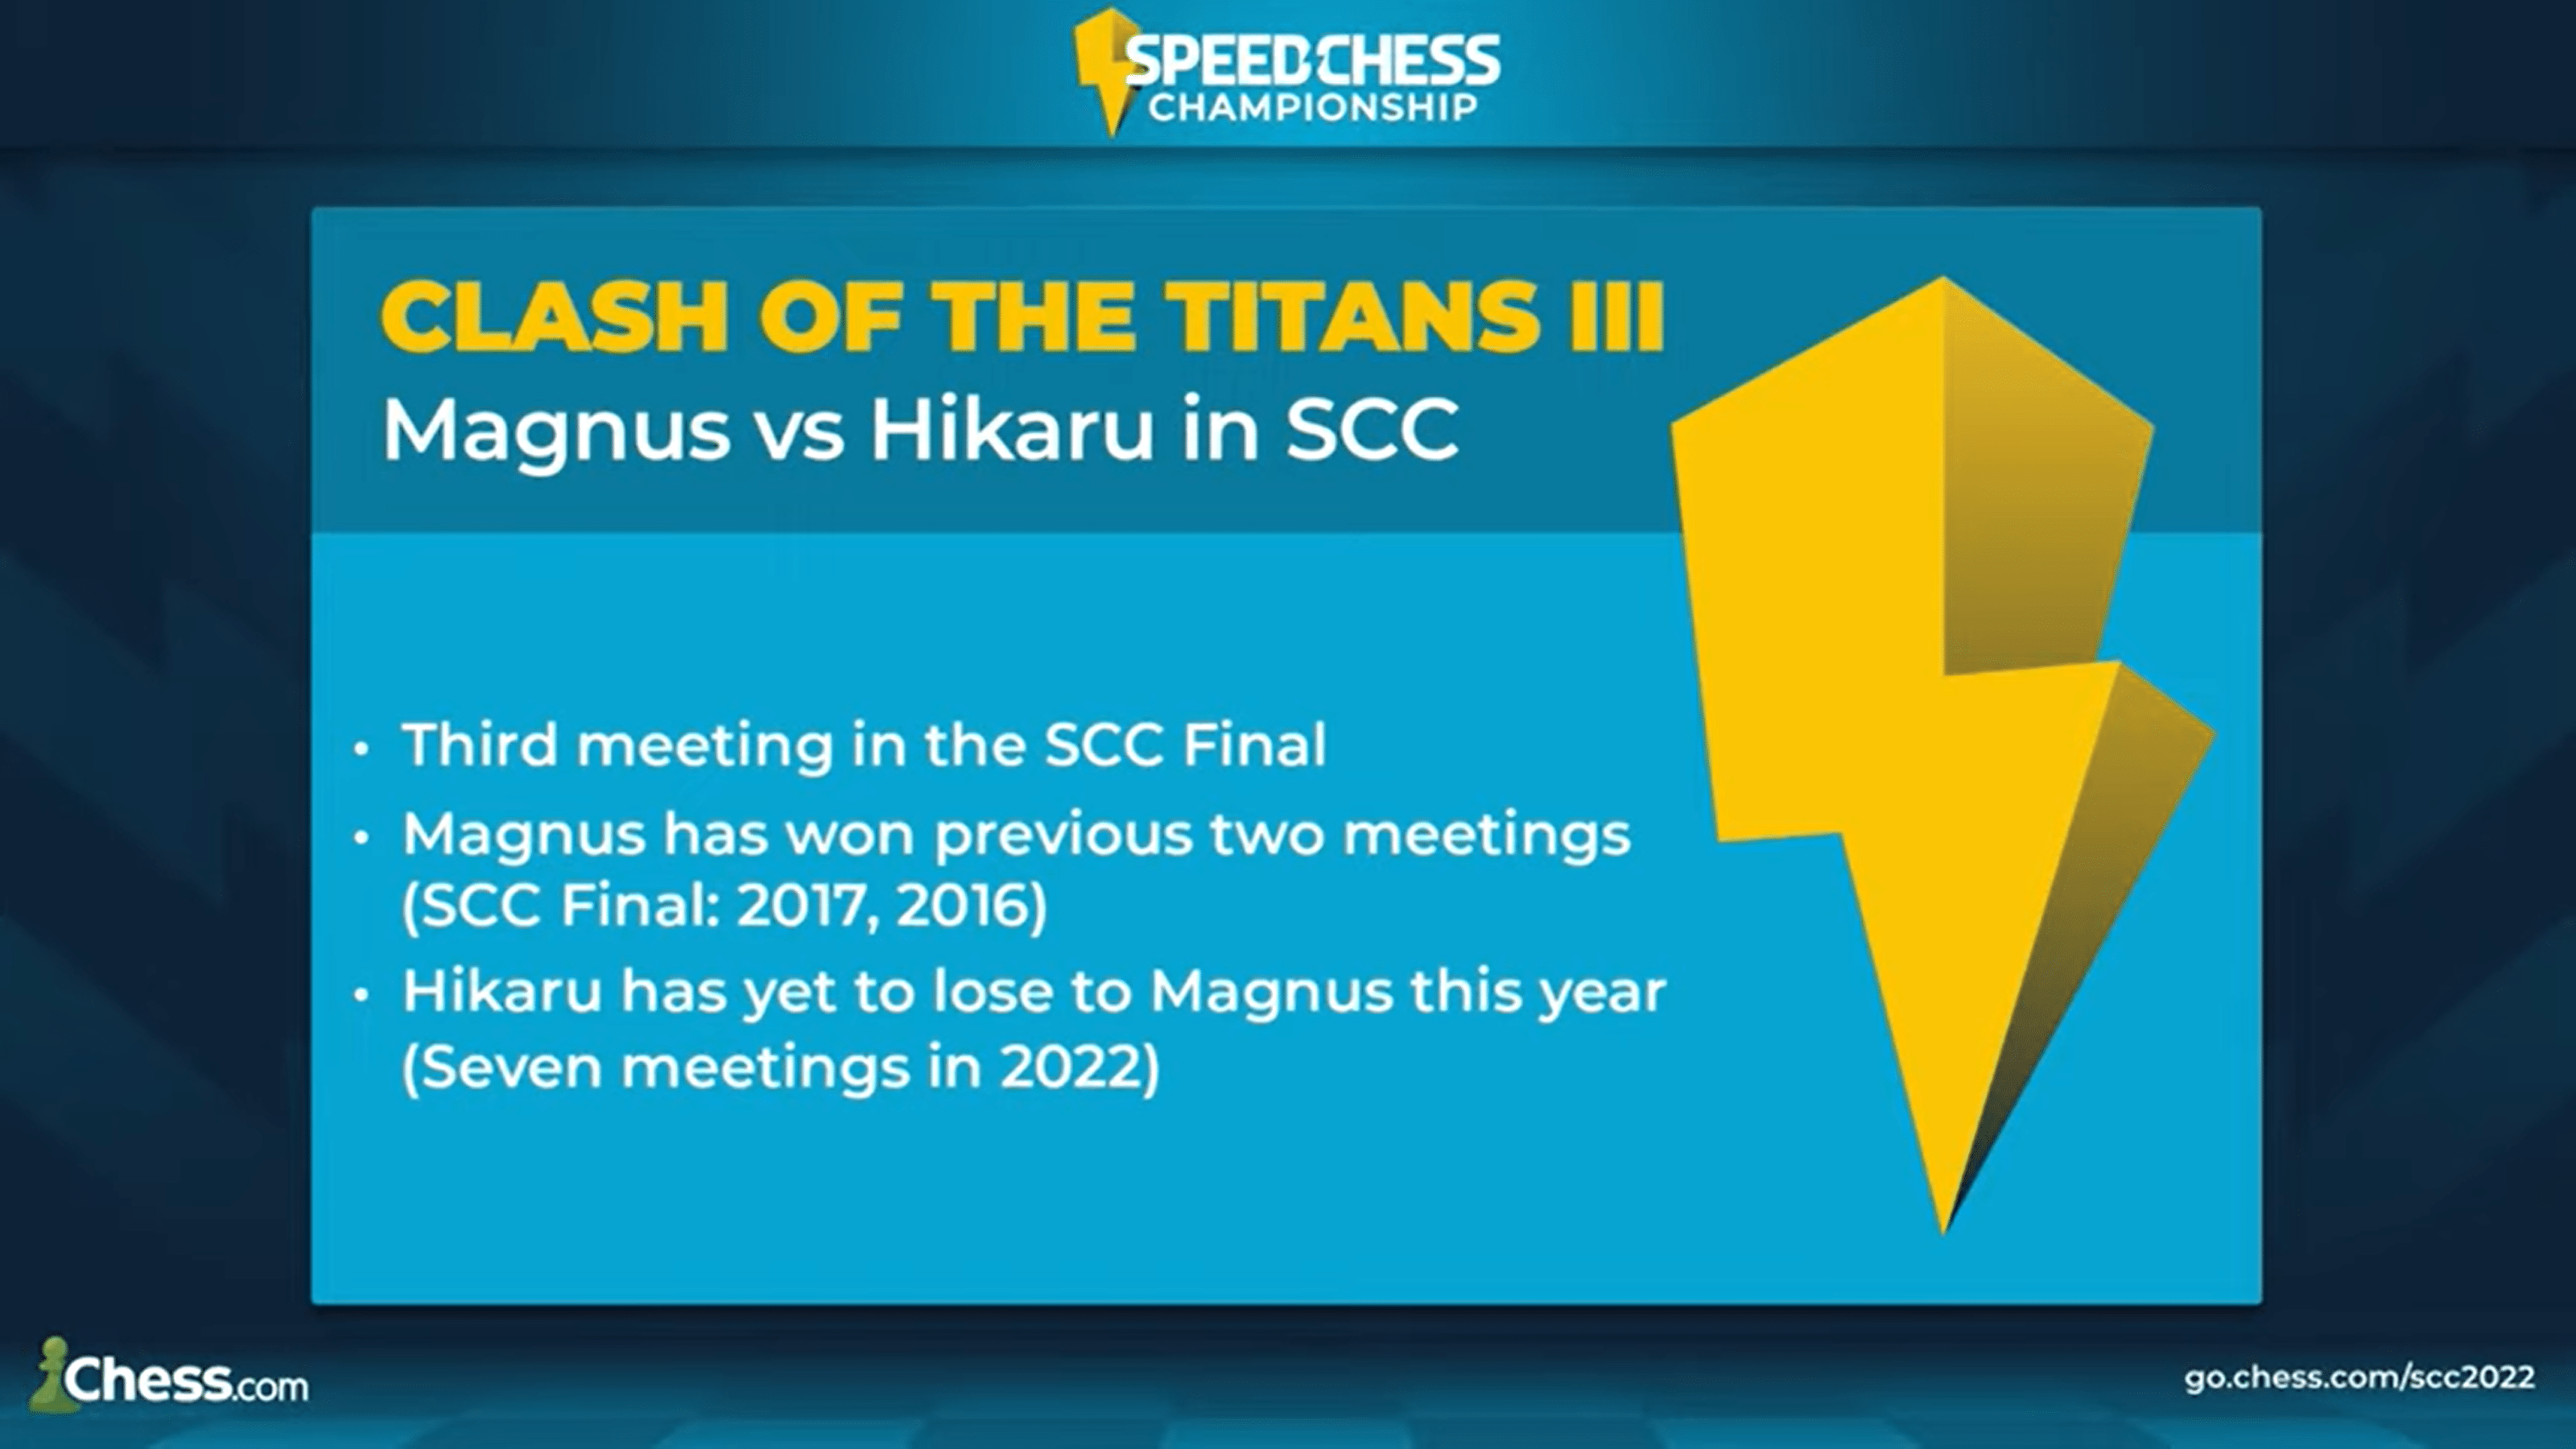 Carlsen to play Nakamura for the 2022 Speed Chess title